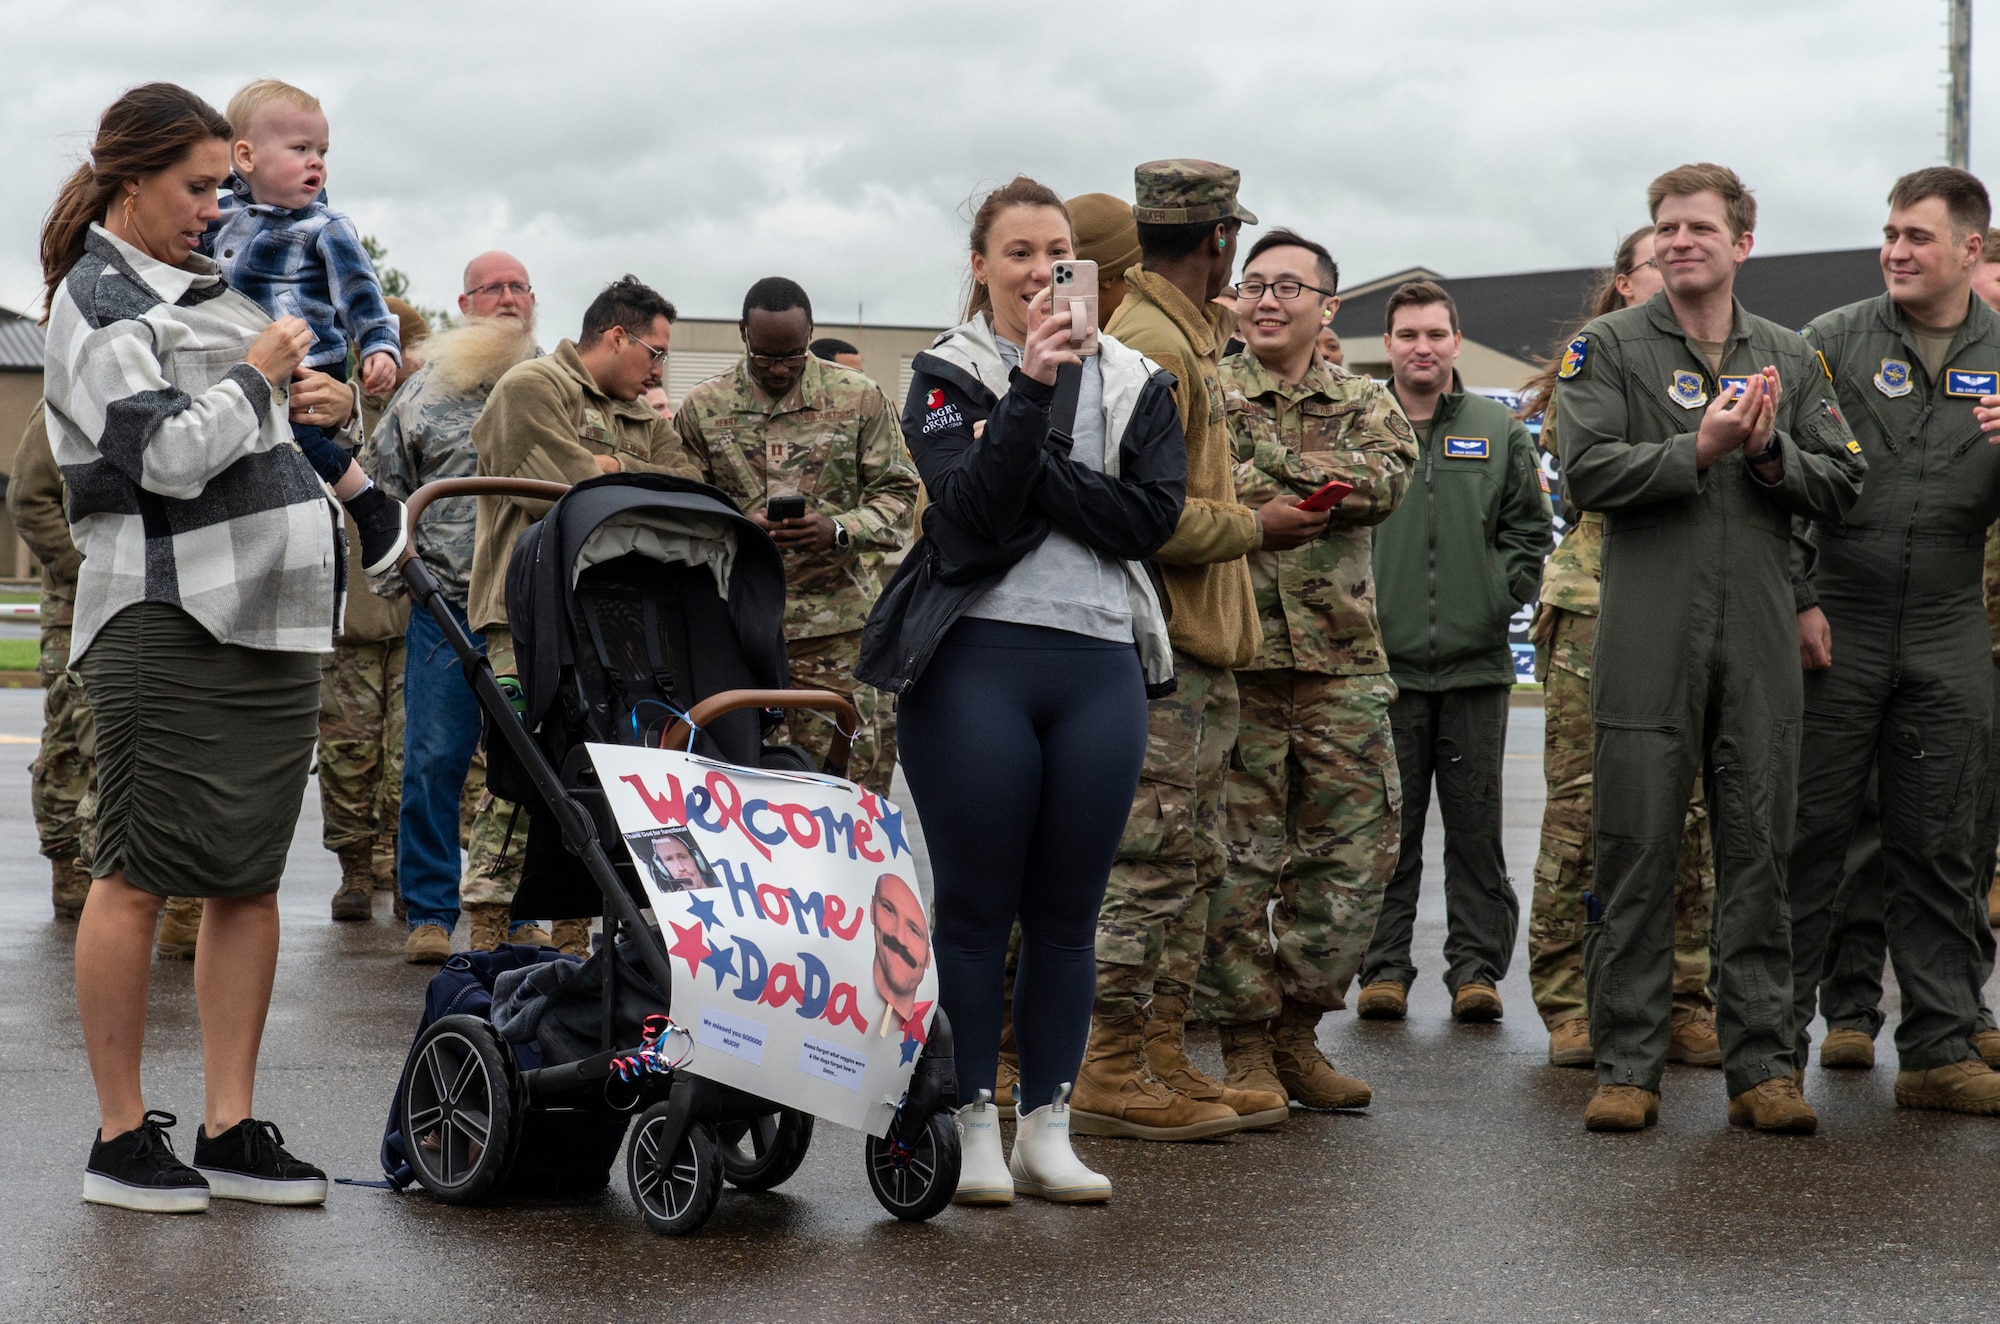 Family, fellow squadron and Team Dover members wait for deployed personnel to deplane at Dover Air Force Base, Delaware, Oct. 3, 2022. Deployed personnel were greeted upon returning to Dover after being deployed to Al Udeid Air Base, Qatar. (U.S. Air Force photo by Roland Balik)